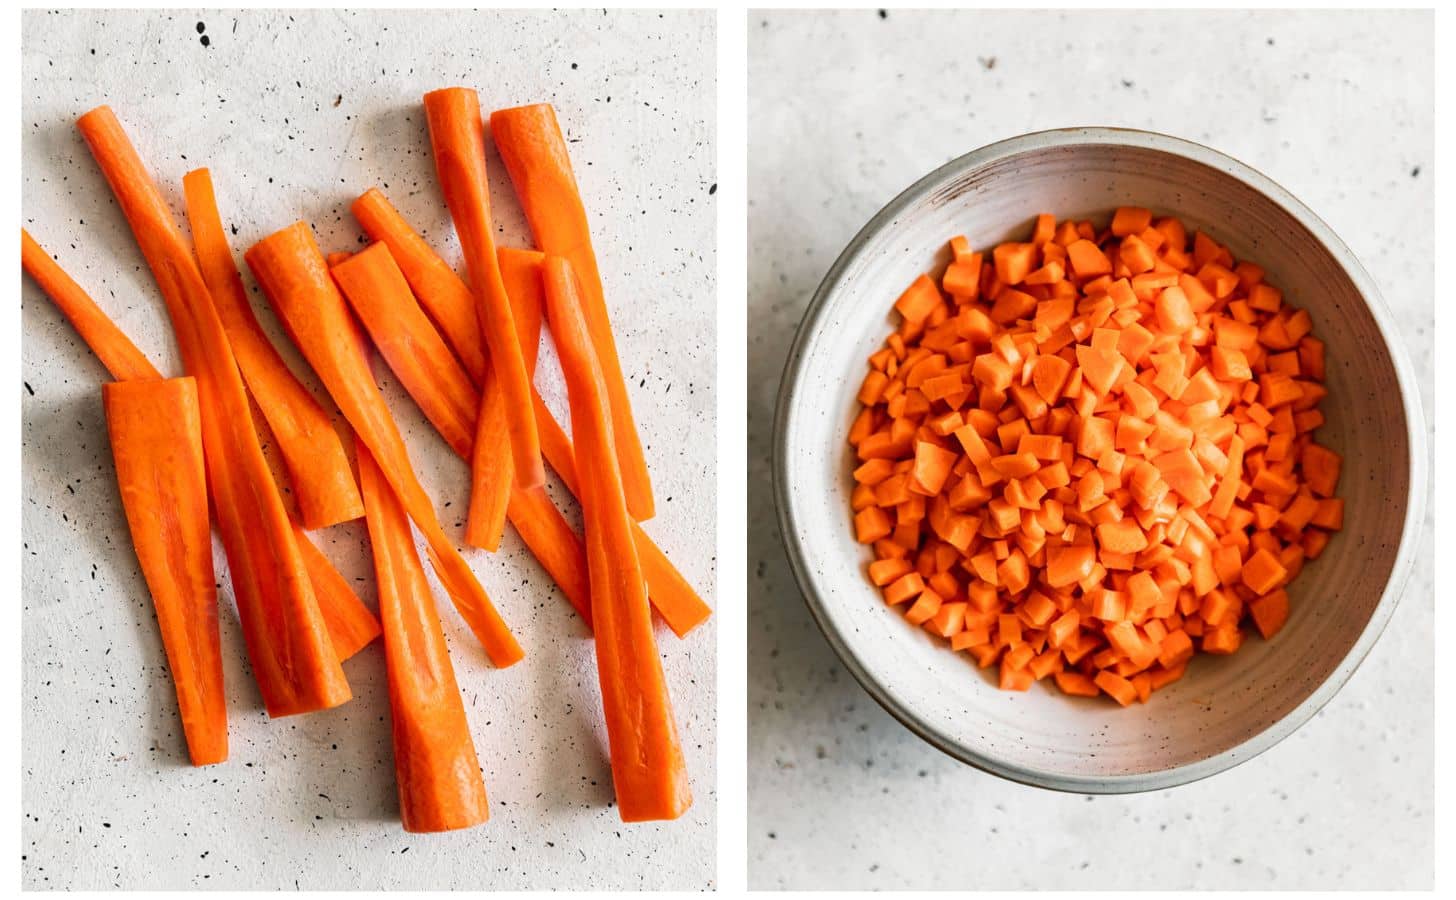 Two images of carrots; on the left, a pile of carrot sticks on a white counter. On the right, a white bowl of diced carrots on a white counter.